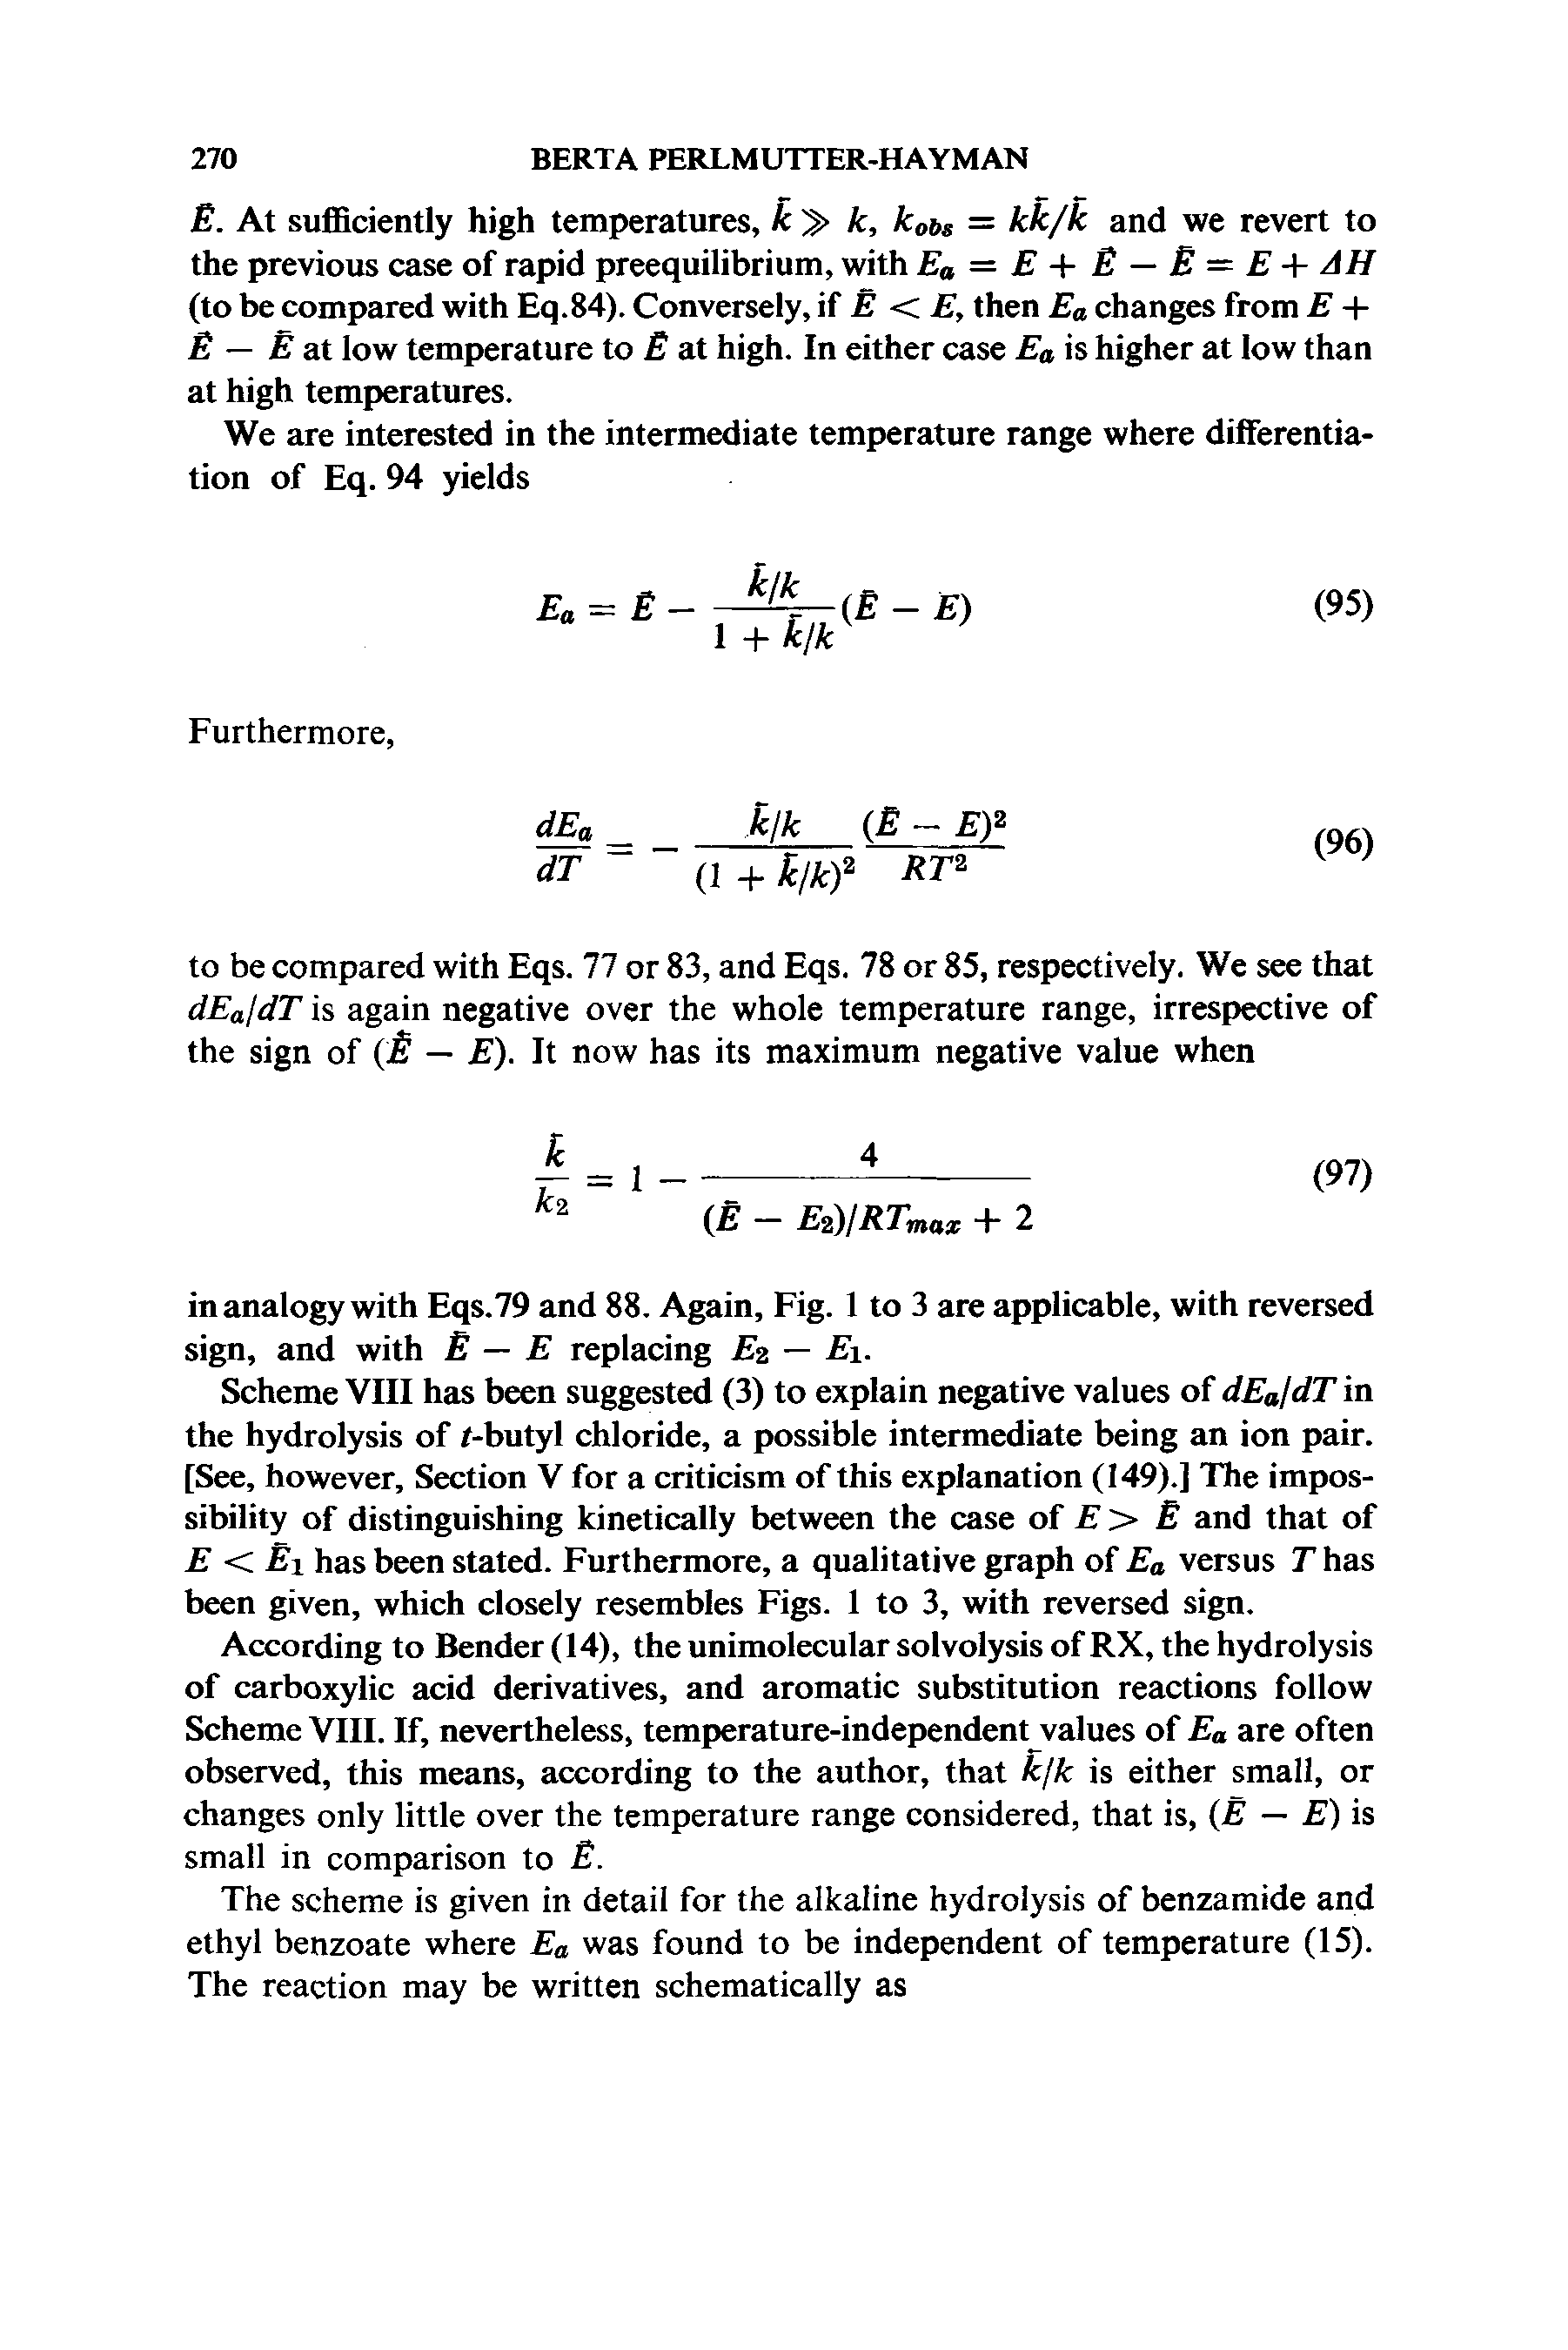 Scheme VIII has been suggested (3) to explain negative values of dEajdT in the hydrolysis of r-butyl chloride, a possible intermediate being an ion pair. [See, however. Section V for a criticism of this explanation (149).] The impossibility of distinguishing kinetically between the case of E> B and that of E a Ex has been stated. Furthermore, a qualitative graph of Ea versus T has been given, which closely resembles Figs. 1 to 3, with reversed sign.